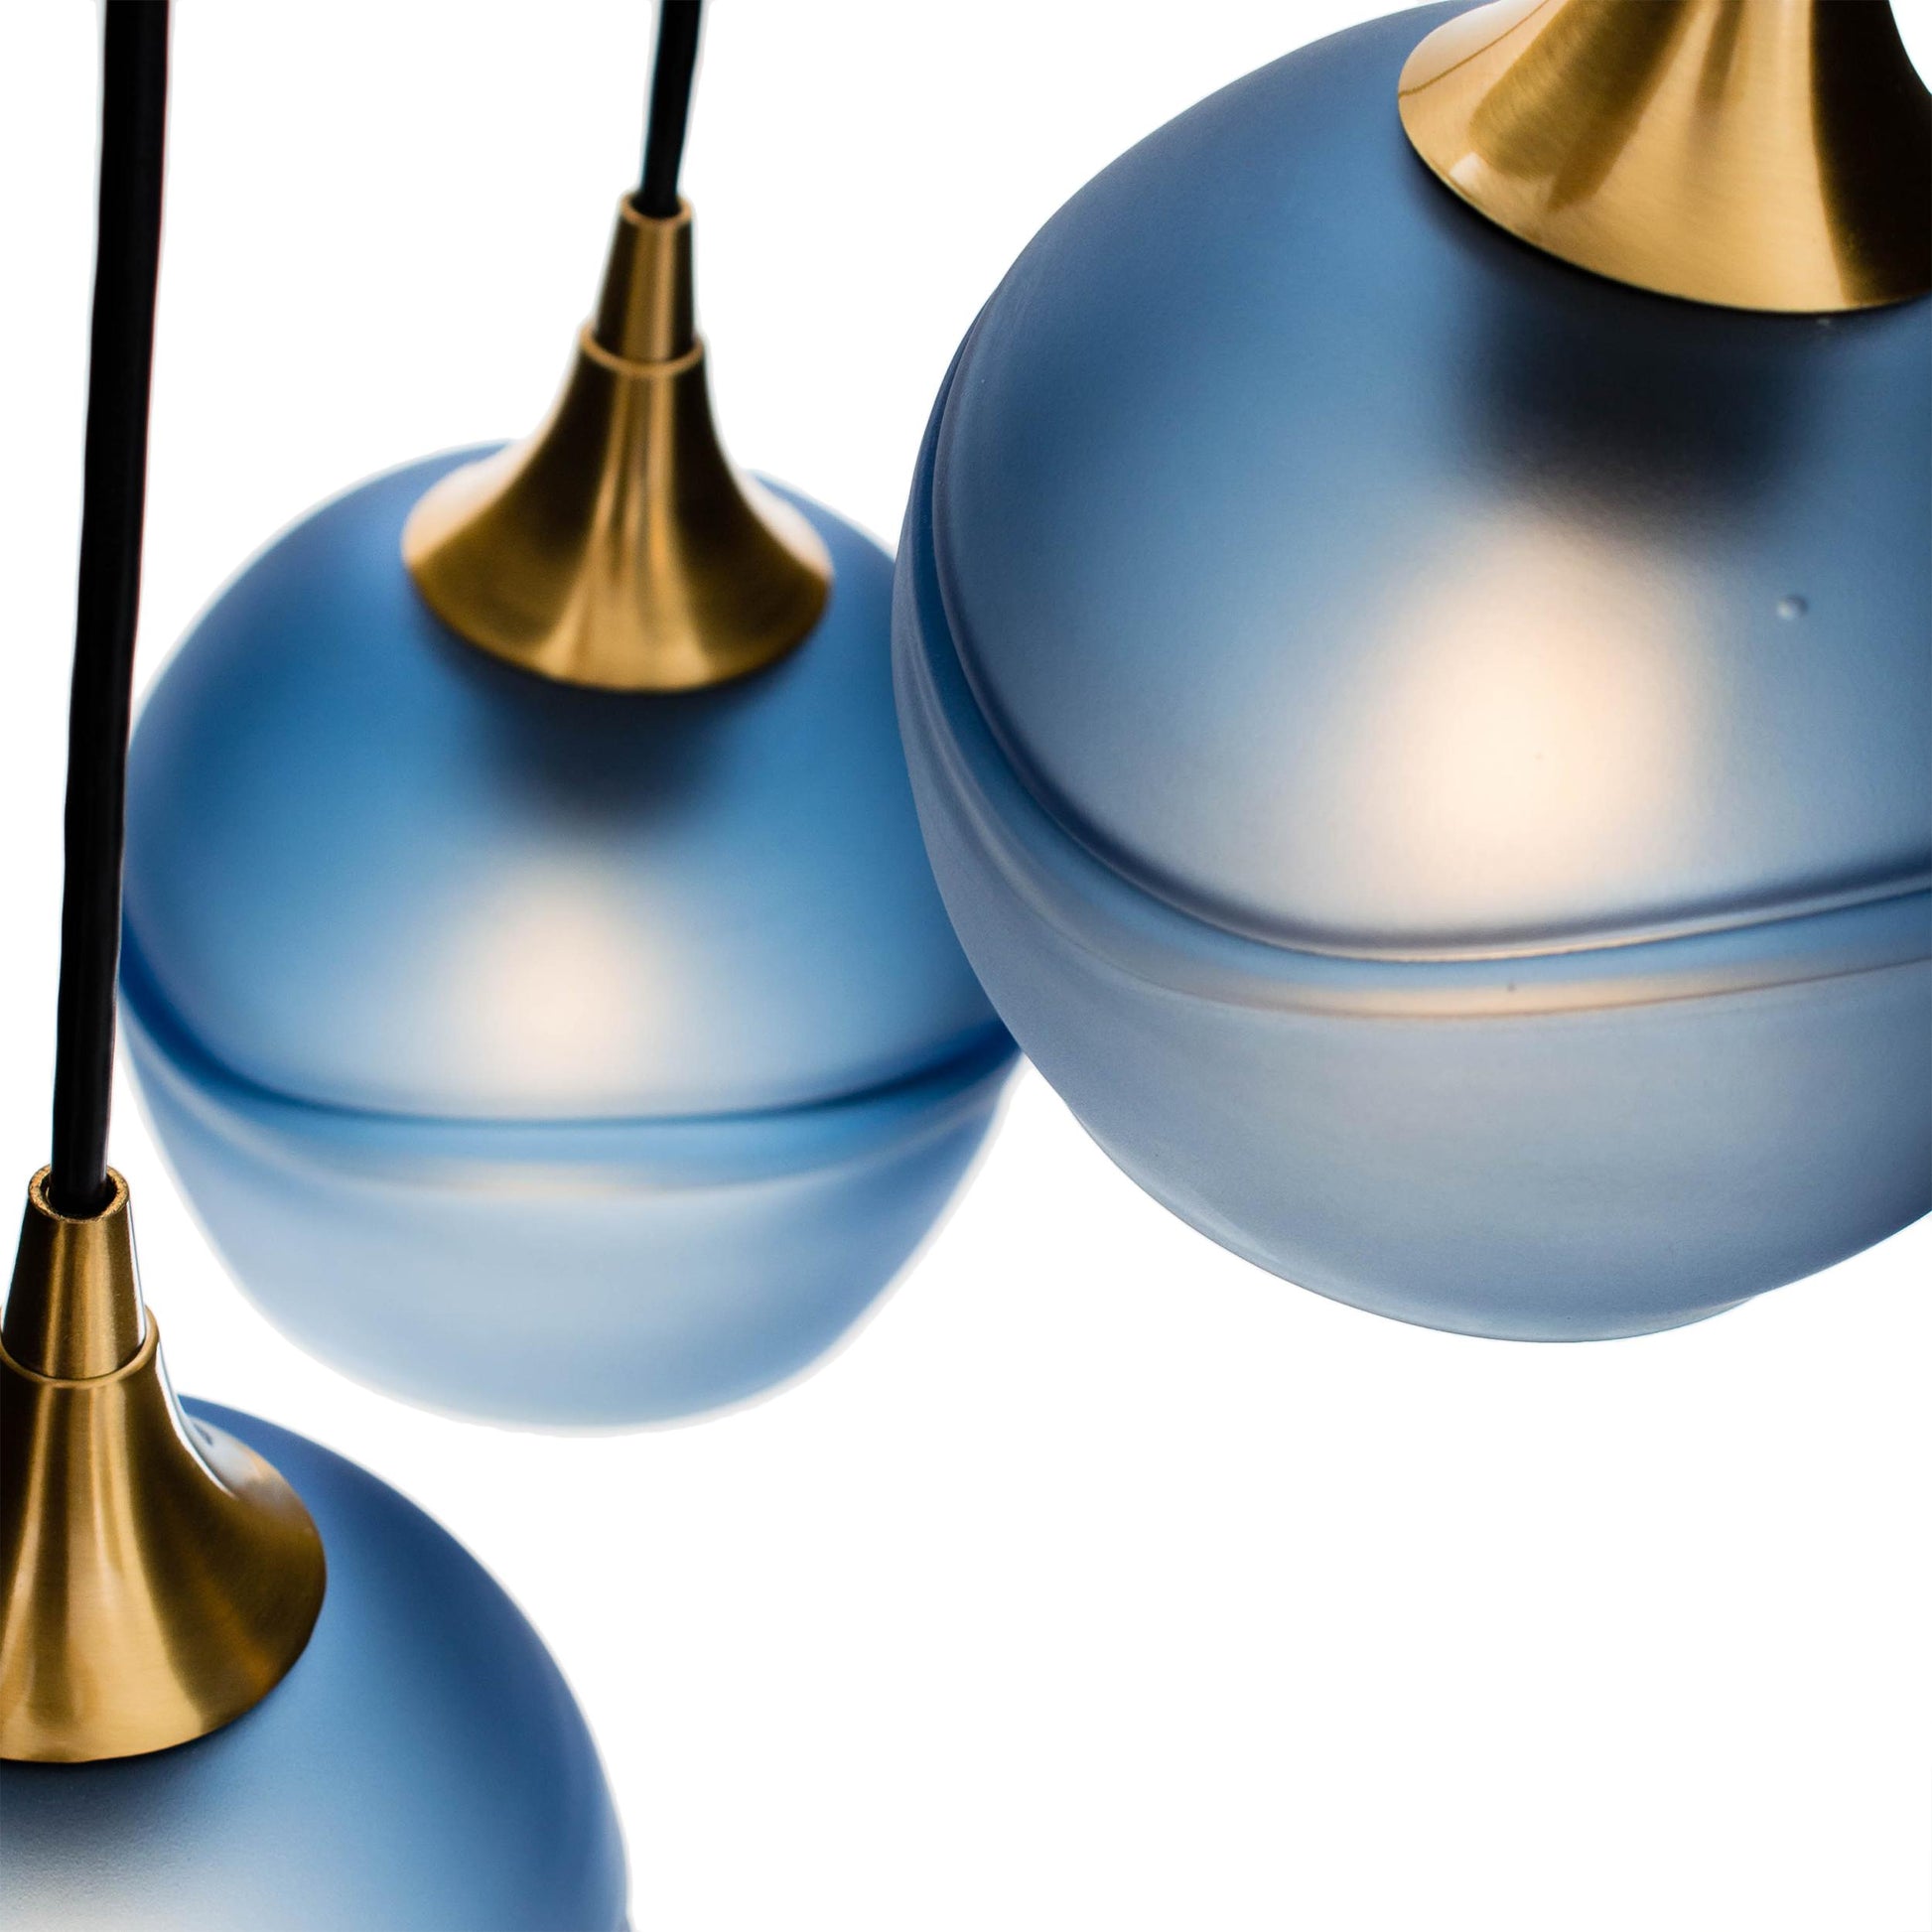 Bicycle Glass Co 763 Glacial: 3 Pendant Cascade Chandelier, Steel Blue Glass, Polished Brass Hardware, Detail Shot, Light Bulbs On